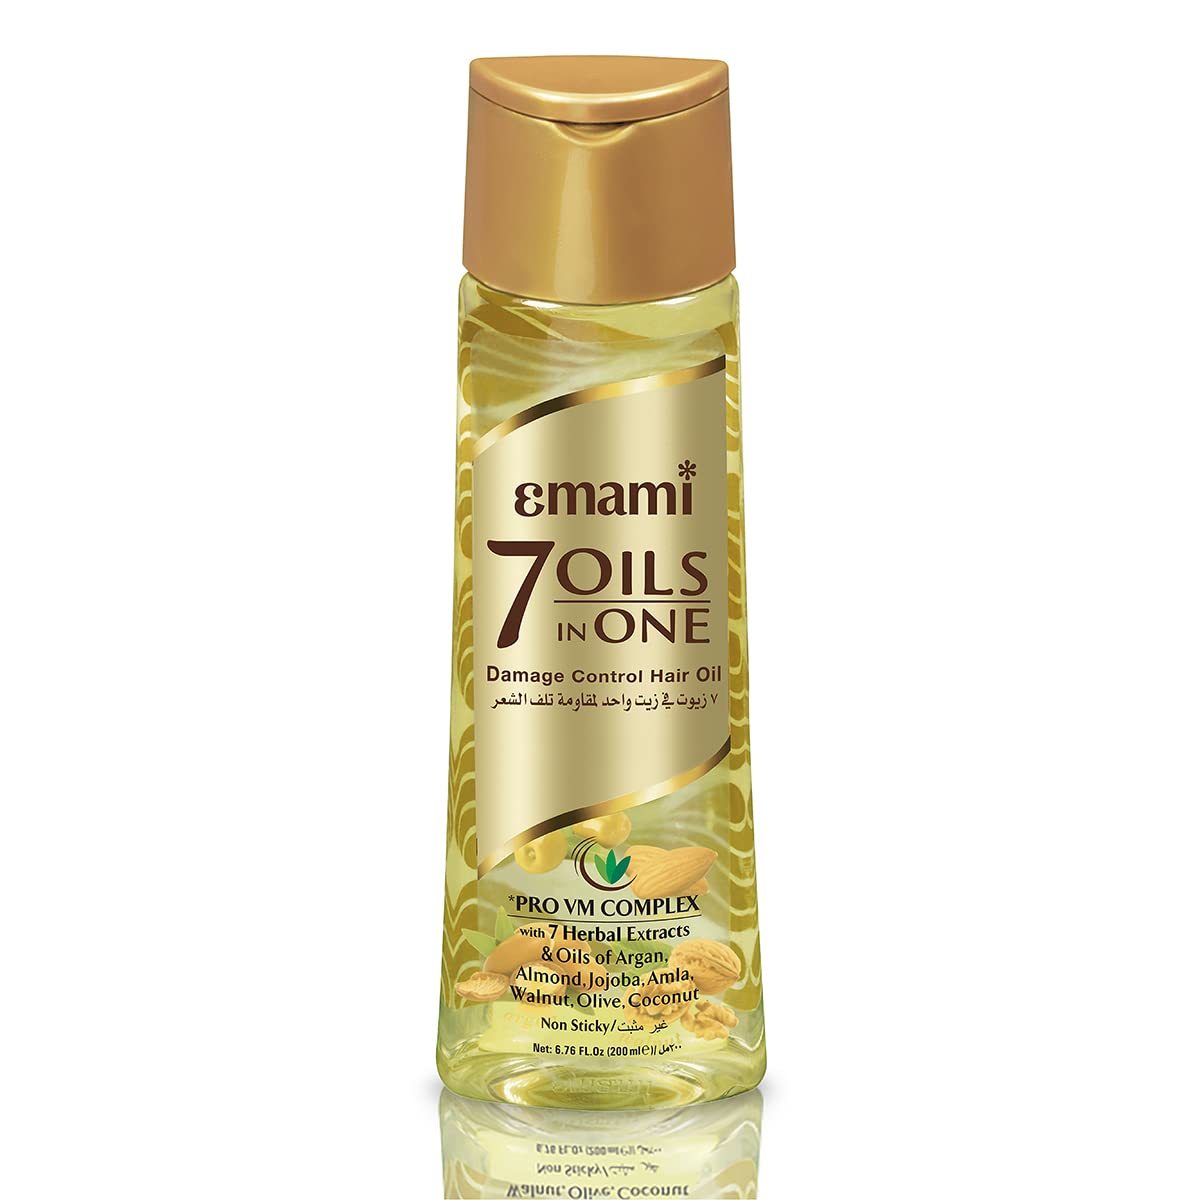 Emami 7 Oils In One Non Sticky and Non Greasy Hair Oil,Free of Sulphates, 200 ml - $16.98